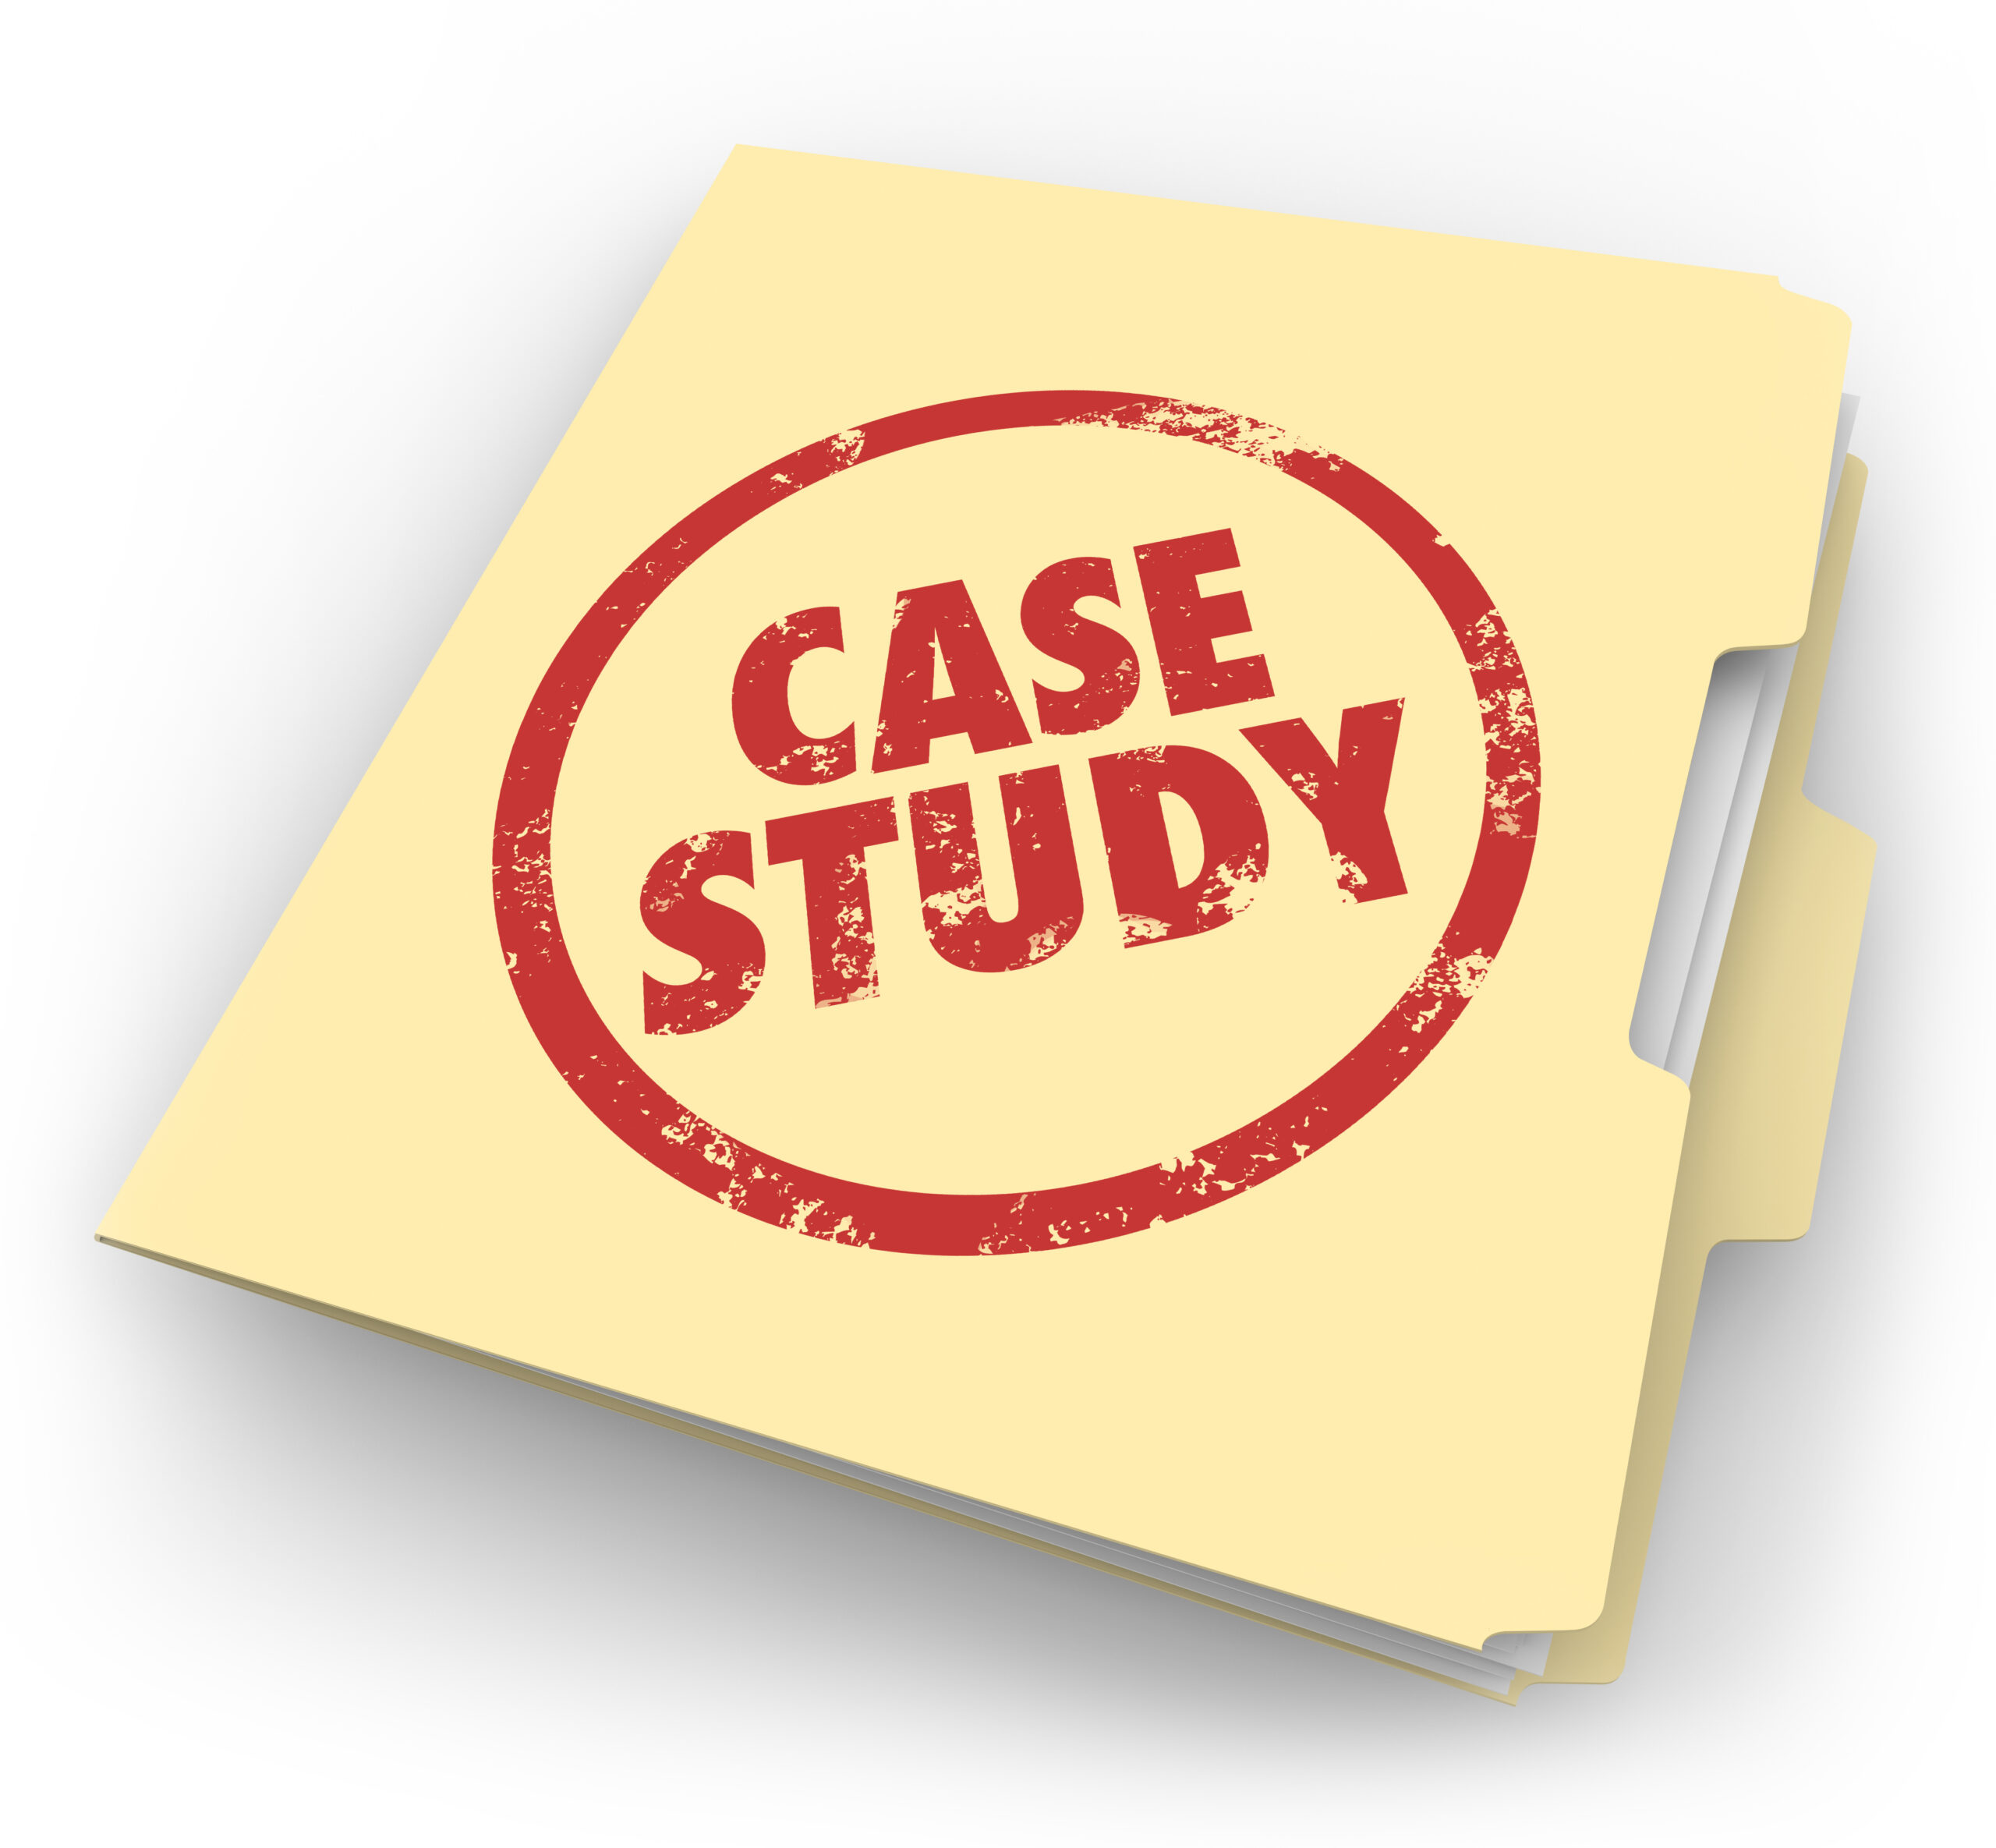 Case Study words stamped in red ink on a manila file folder to illustrate a good example or best practice to explore, read or study